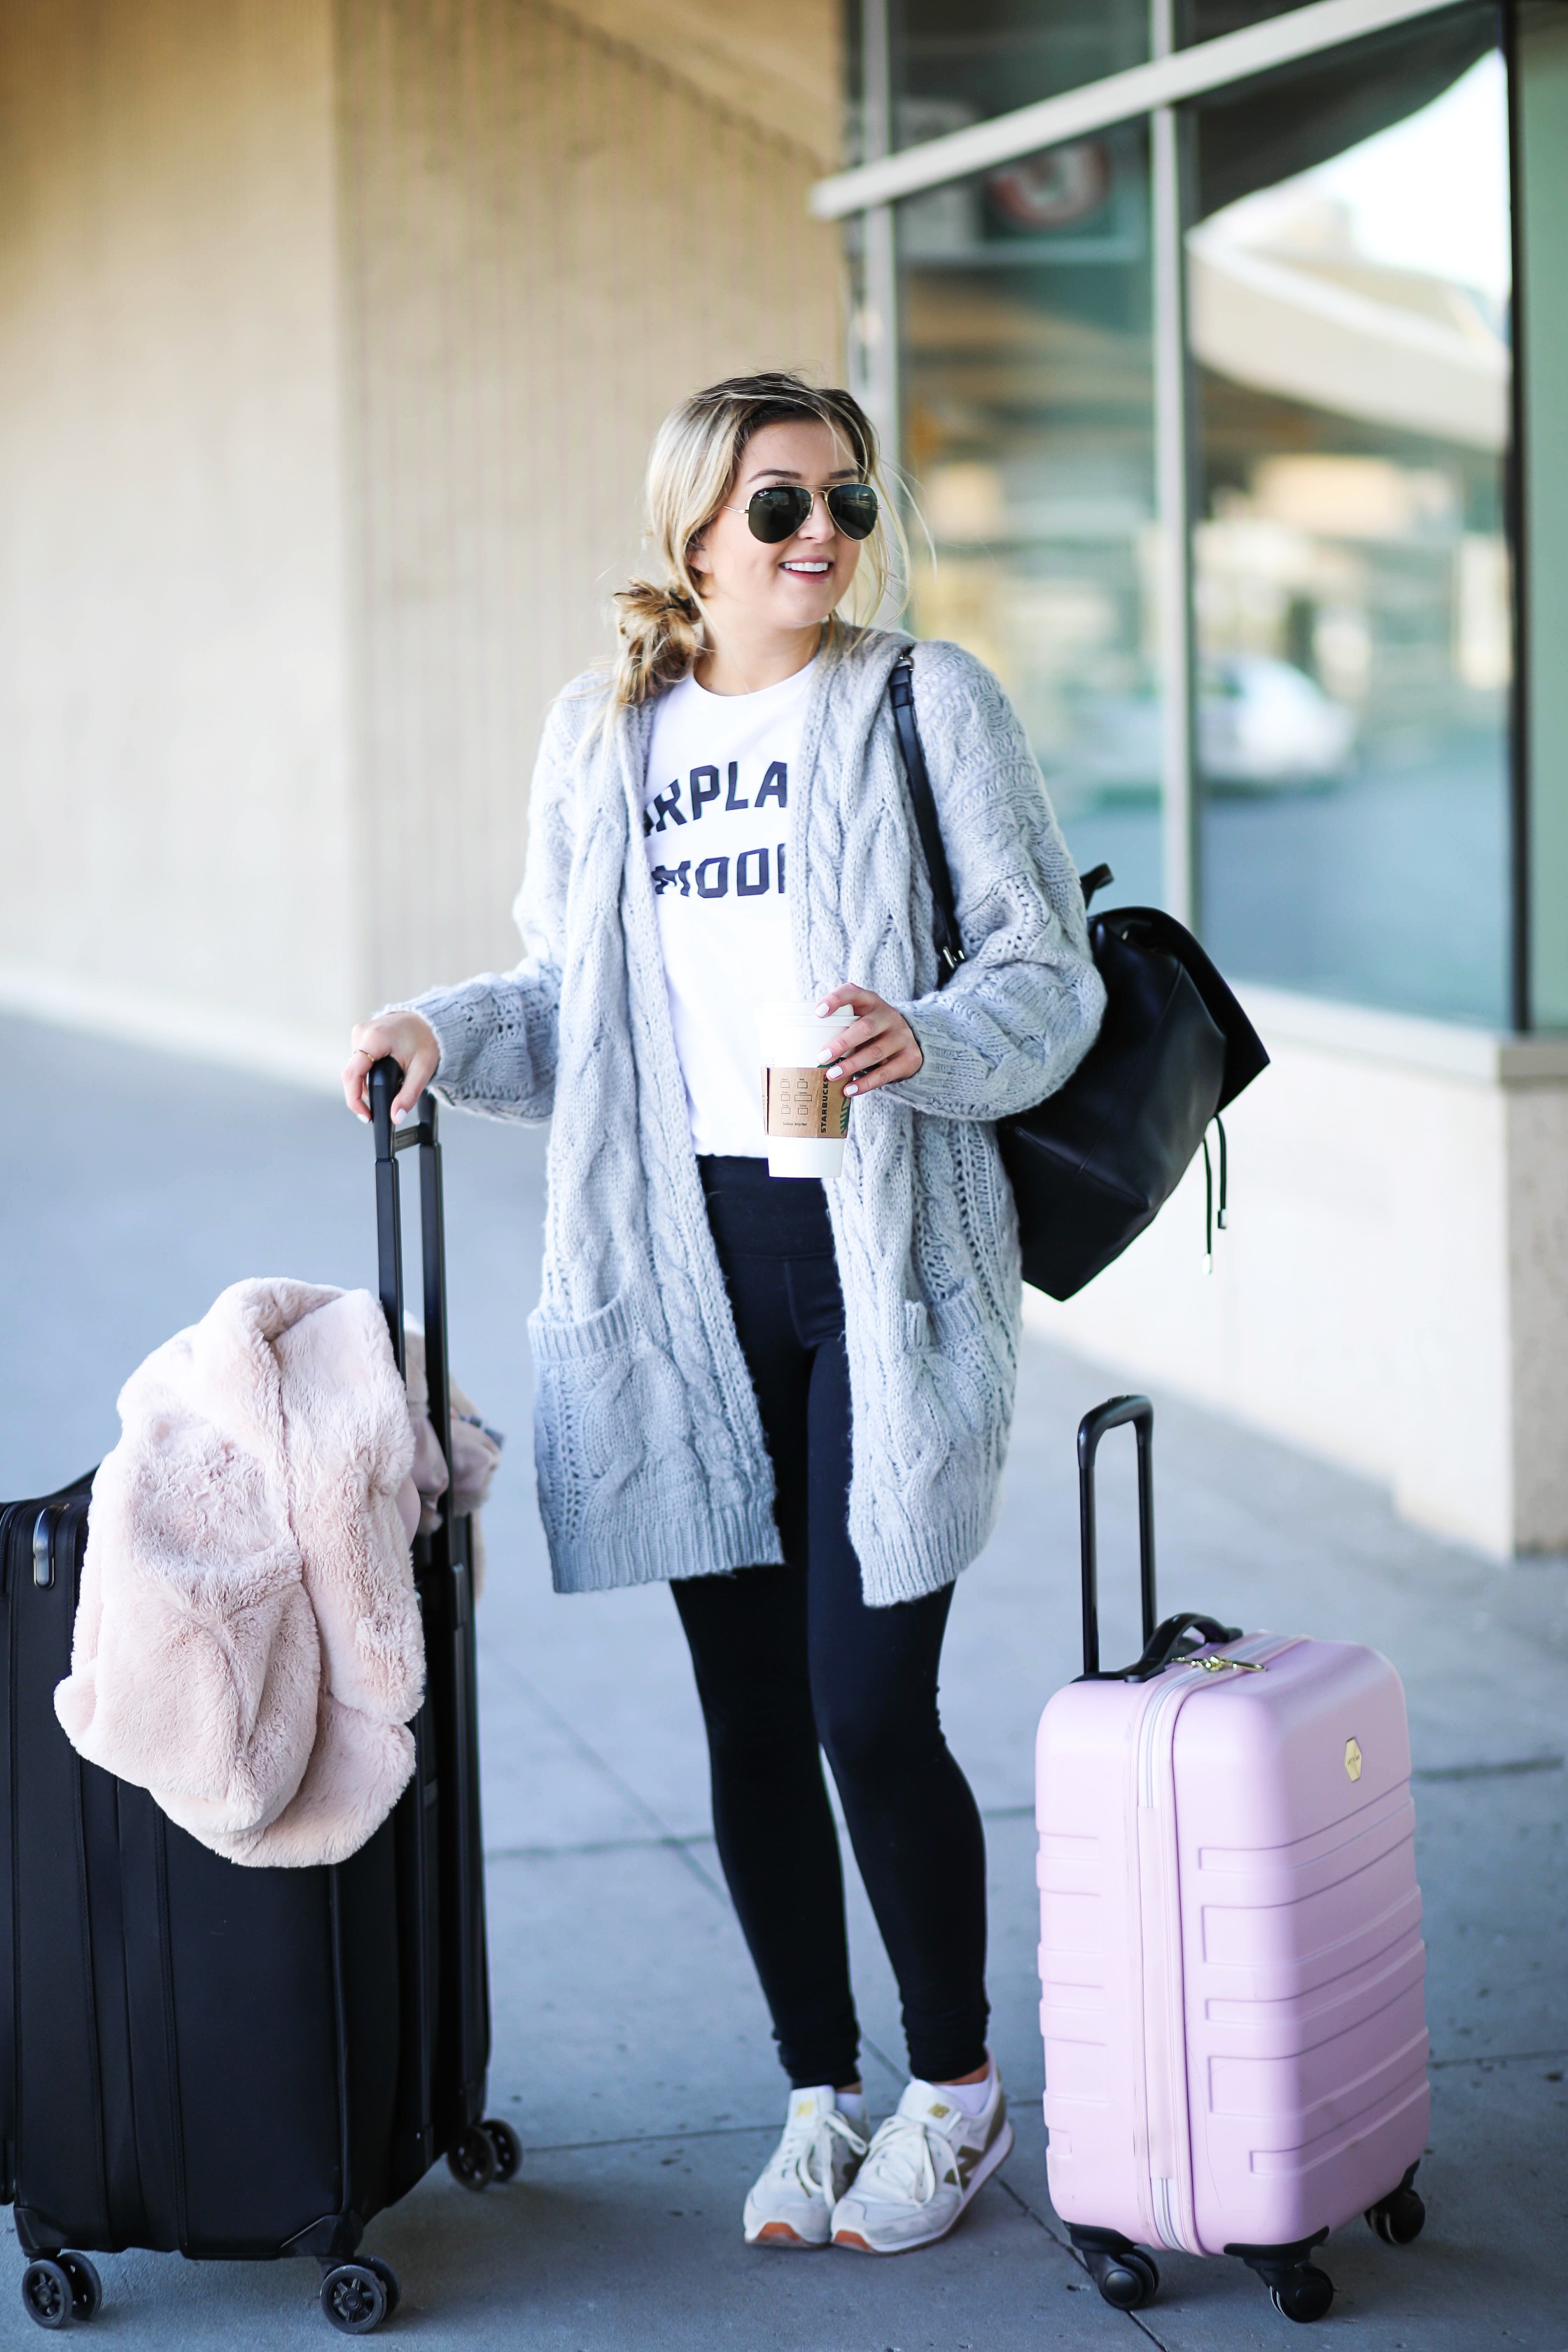 Airplane outfit! What to wear on an airplane. Artport style on fashion blog daily dose of charm by lauren lindmark